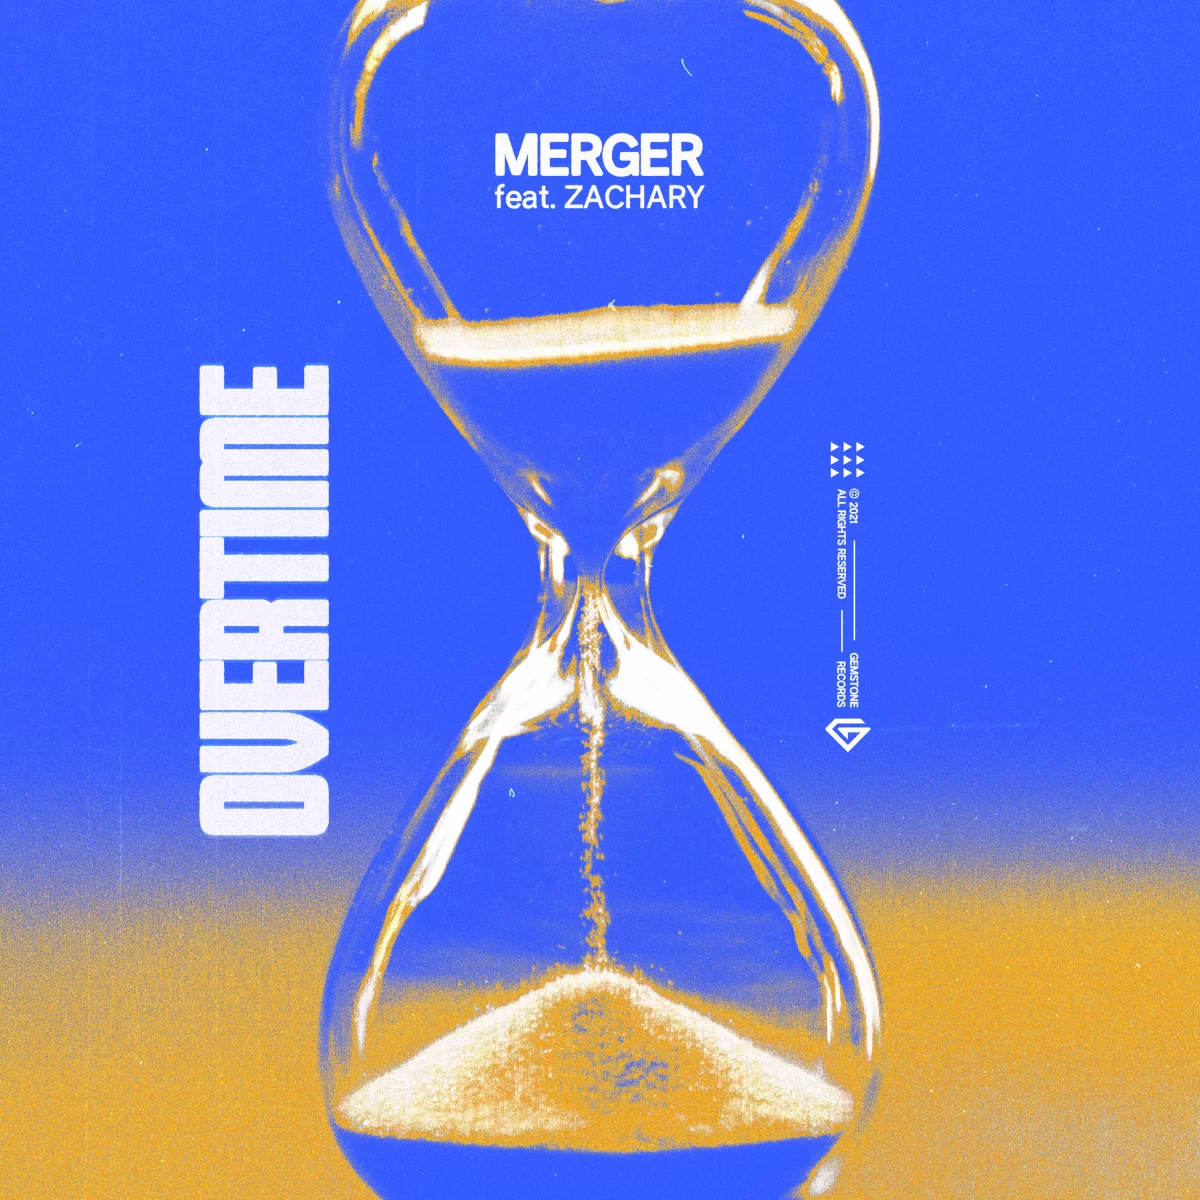 Overtime - Merger⁠ feat.⁠ ZACHARY⁠